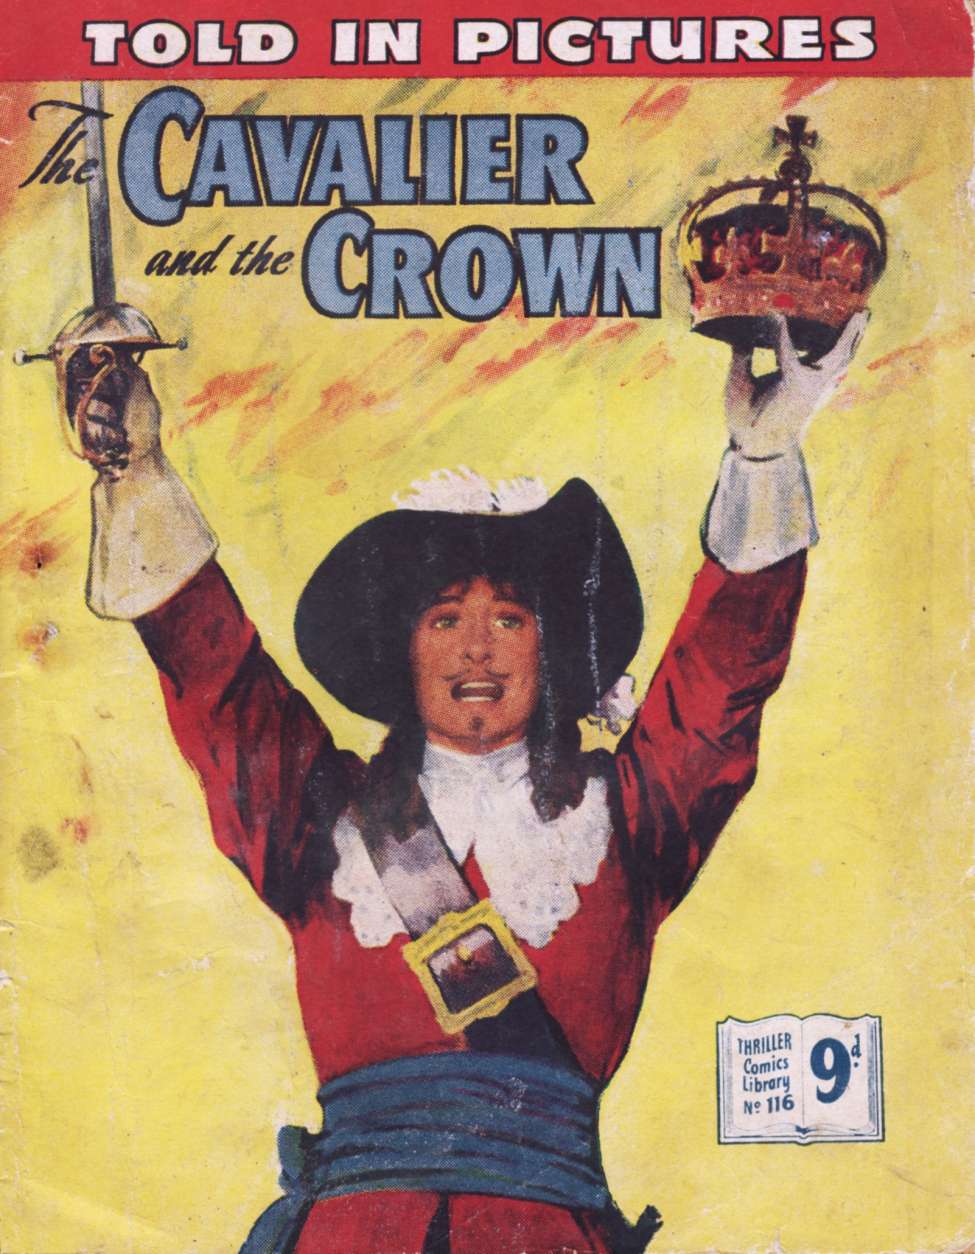 Comic Book Cover For Thriller Comics Library 116 - The Cavalier and the Crown